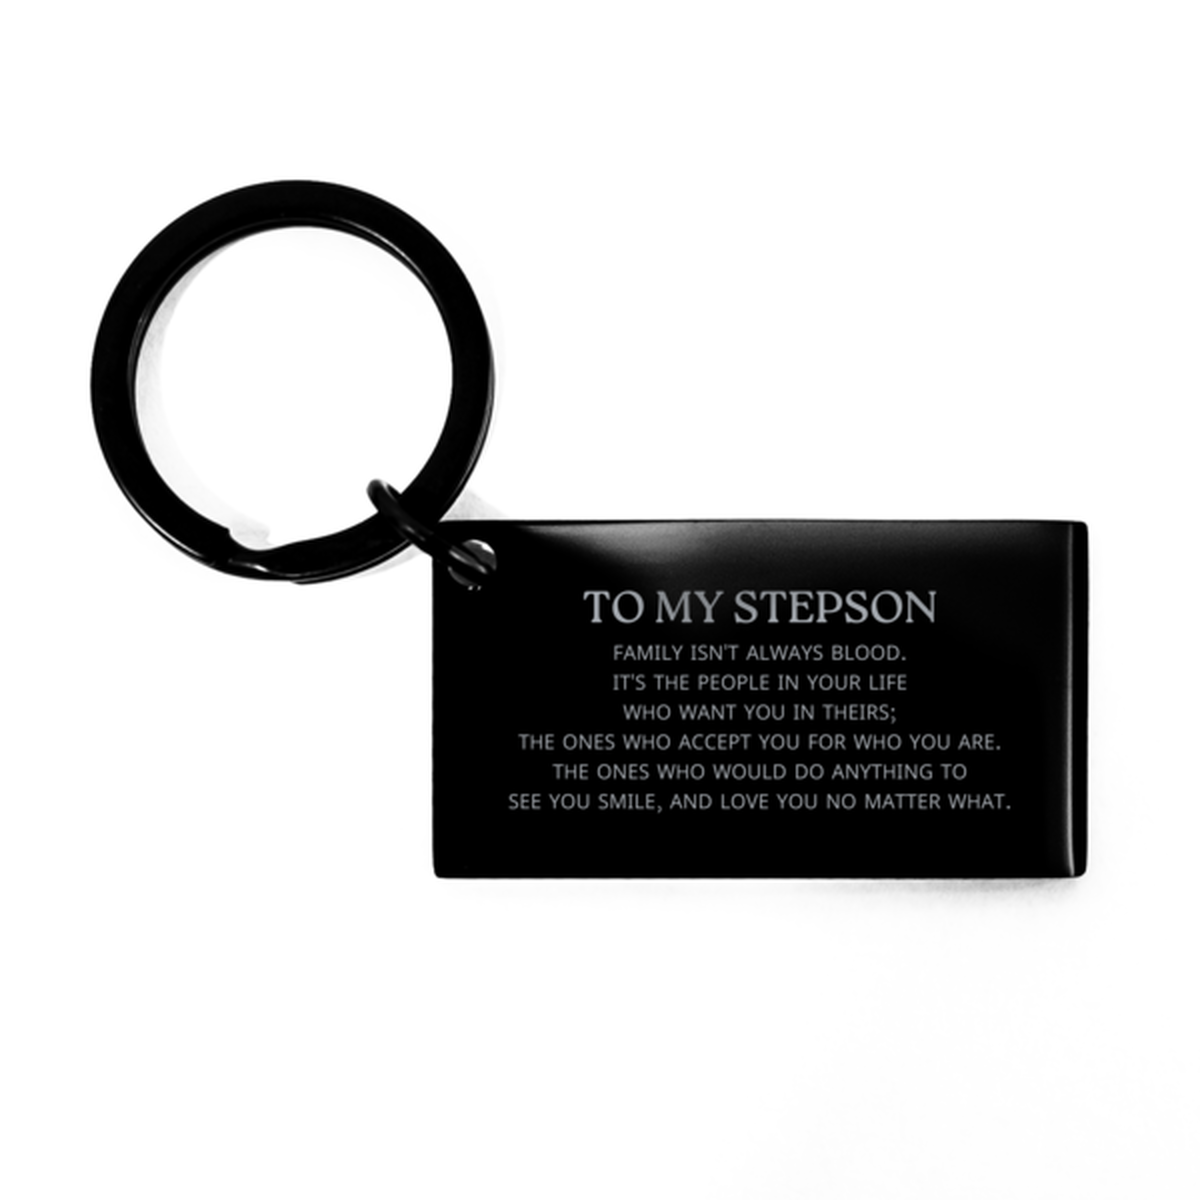 To My Stepson Gifts, Family isn't always blood, Stepson Keychain, Birthday Christmas Unique Present For Stepson